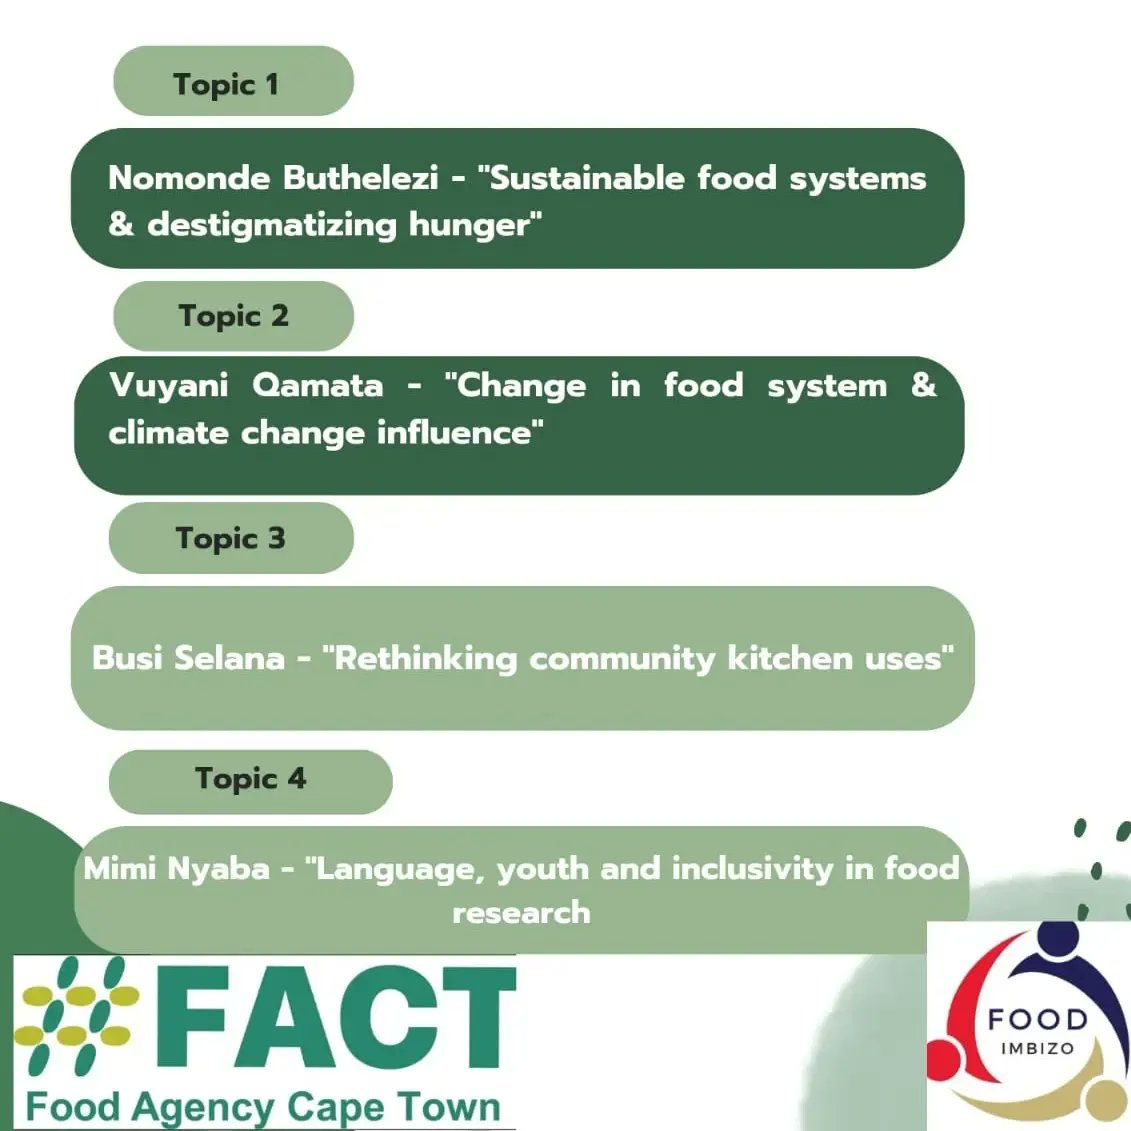 We are at @BerthaHouseCPT today with @FoodSecurity_za  for the Food Imbizo!! 

You can still join online: docs.google.com/forms/d/e/1FAI…

#fact #factcapetown #foodimbizo #foodsecurity #foodjustice #Food #FoodCrises #coresearch #Capetown #southafrica